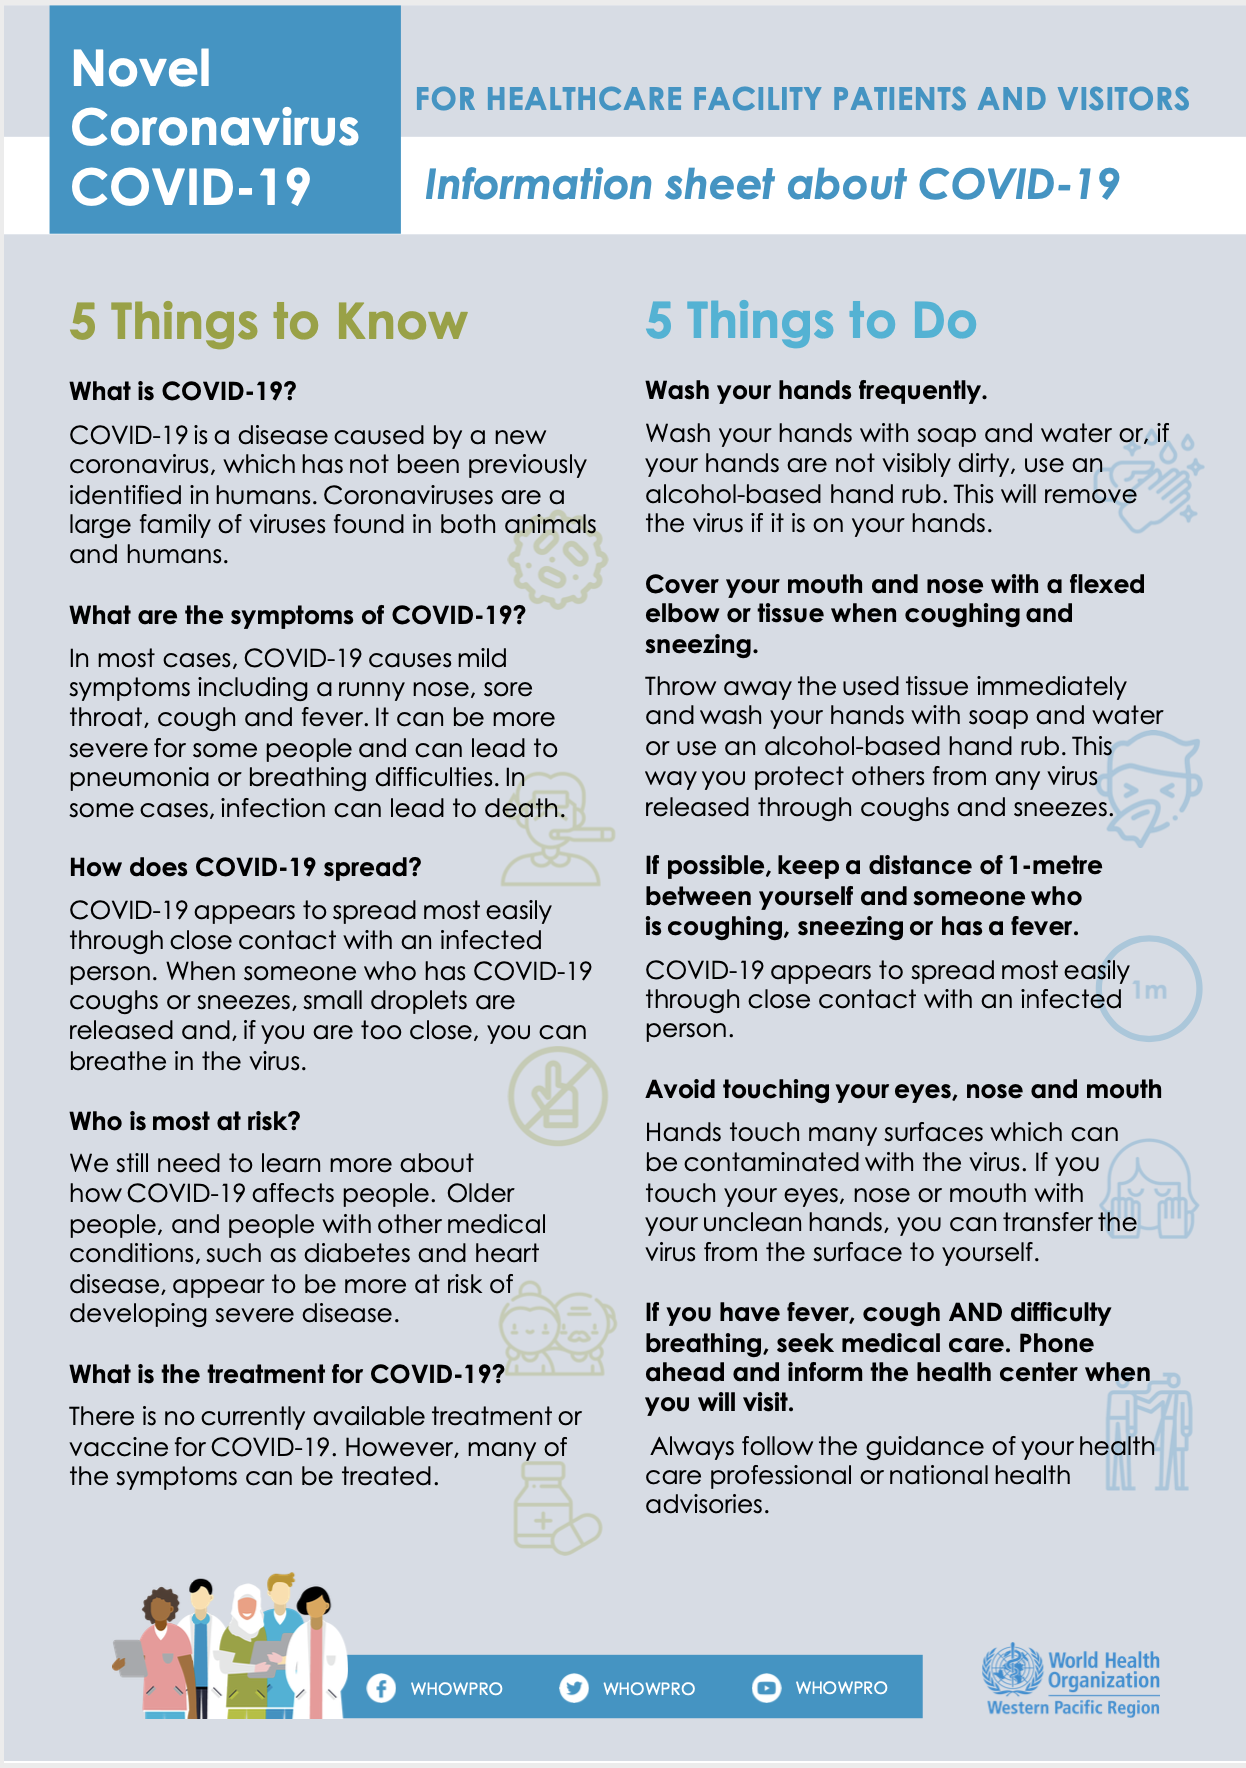 WHO 5 Things to Know